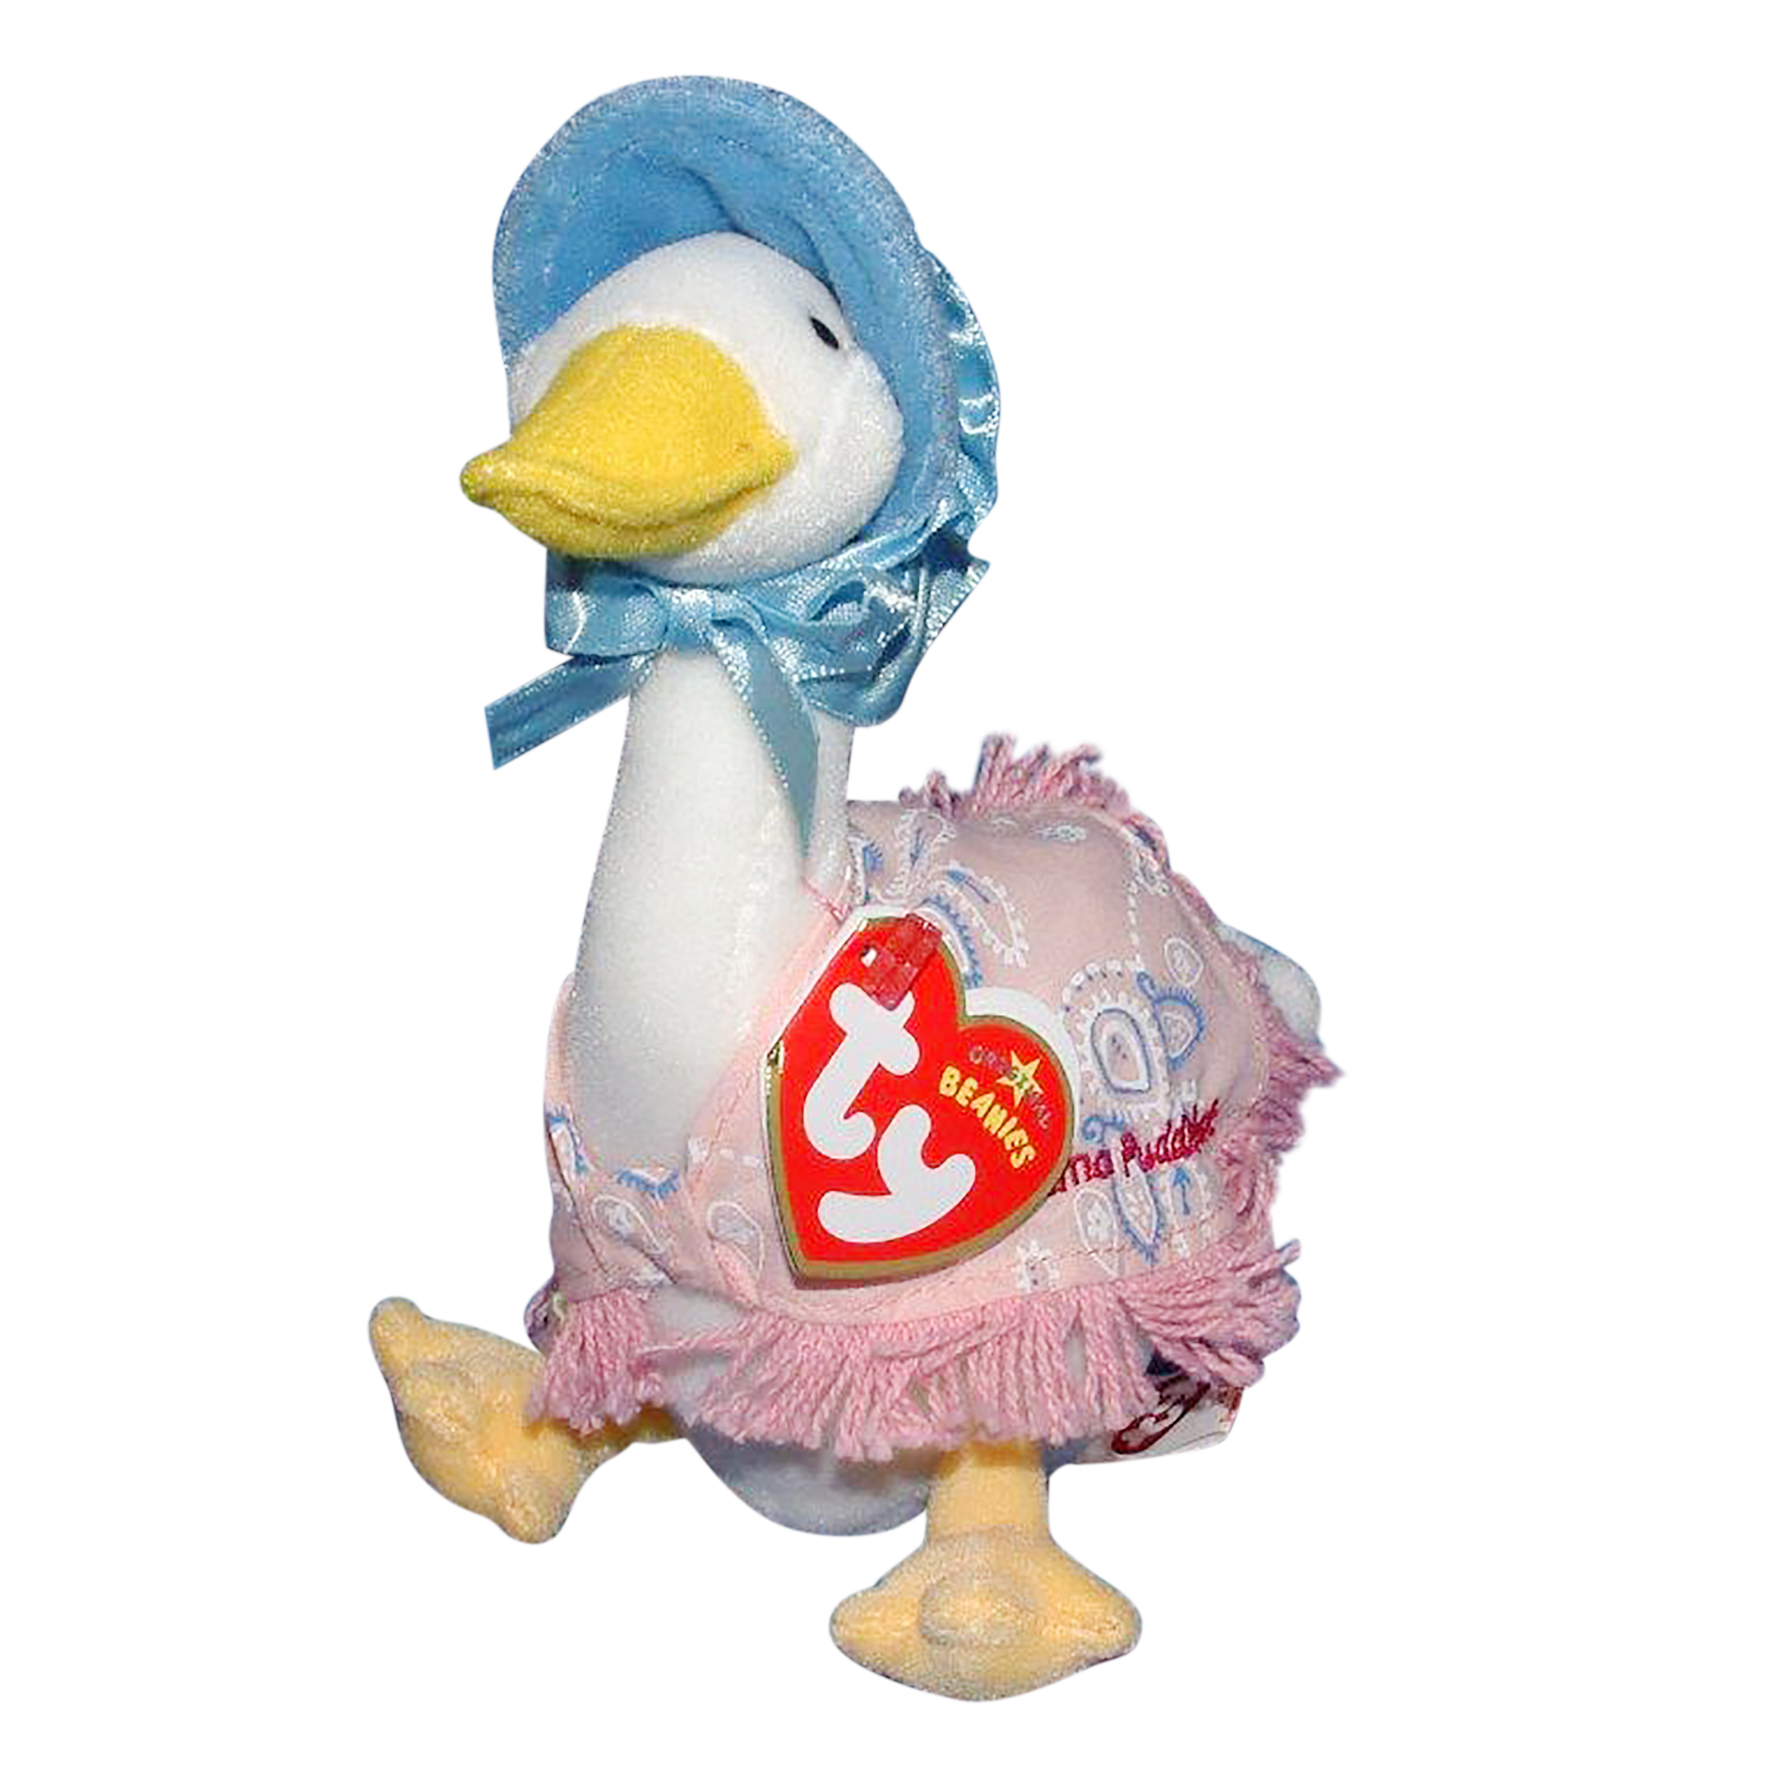 Ty Beanie Baby: The Tale of Jemima Puddle|duck the Duck | Pink Letters | Stuffed Animal - image 1 of 1